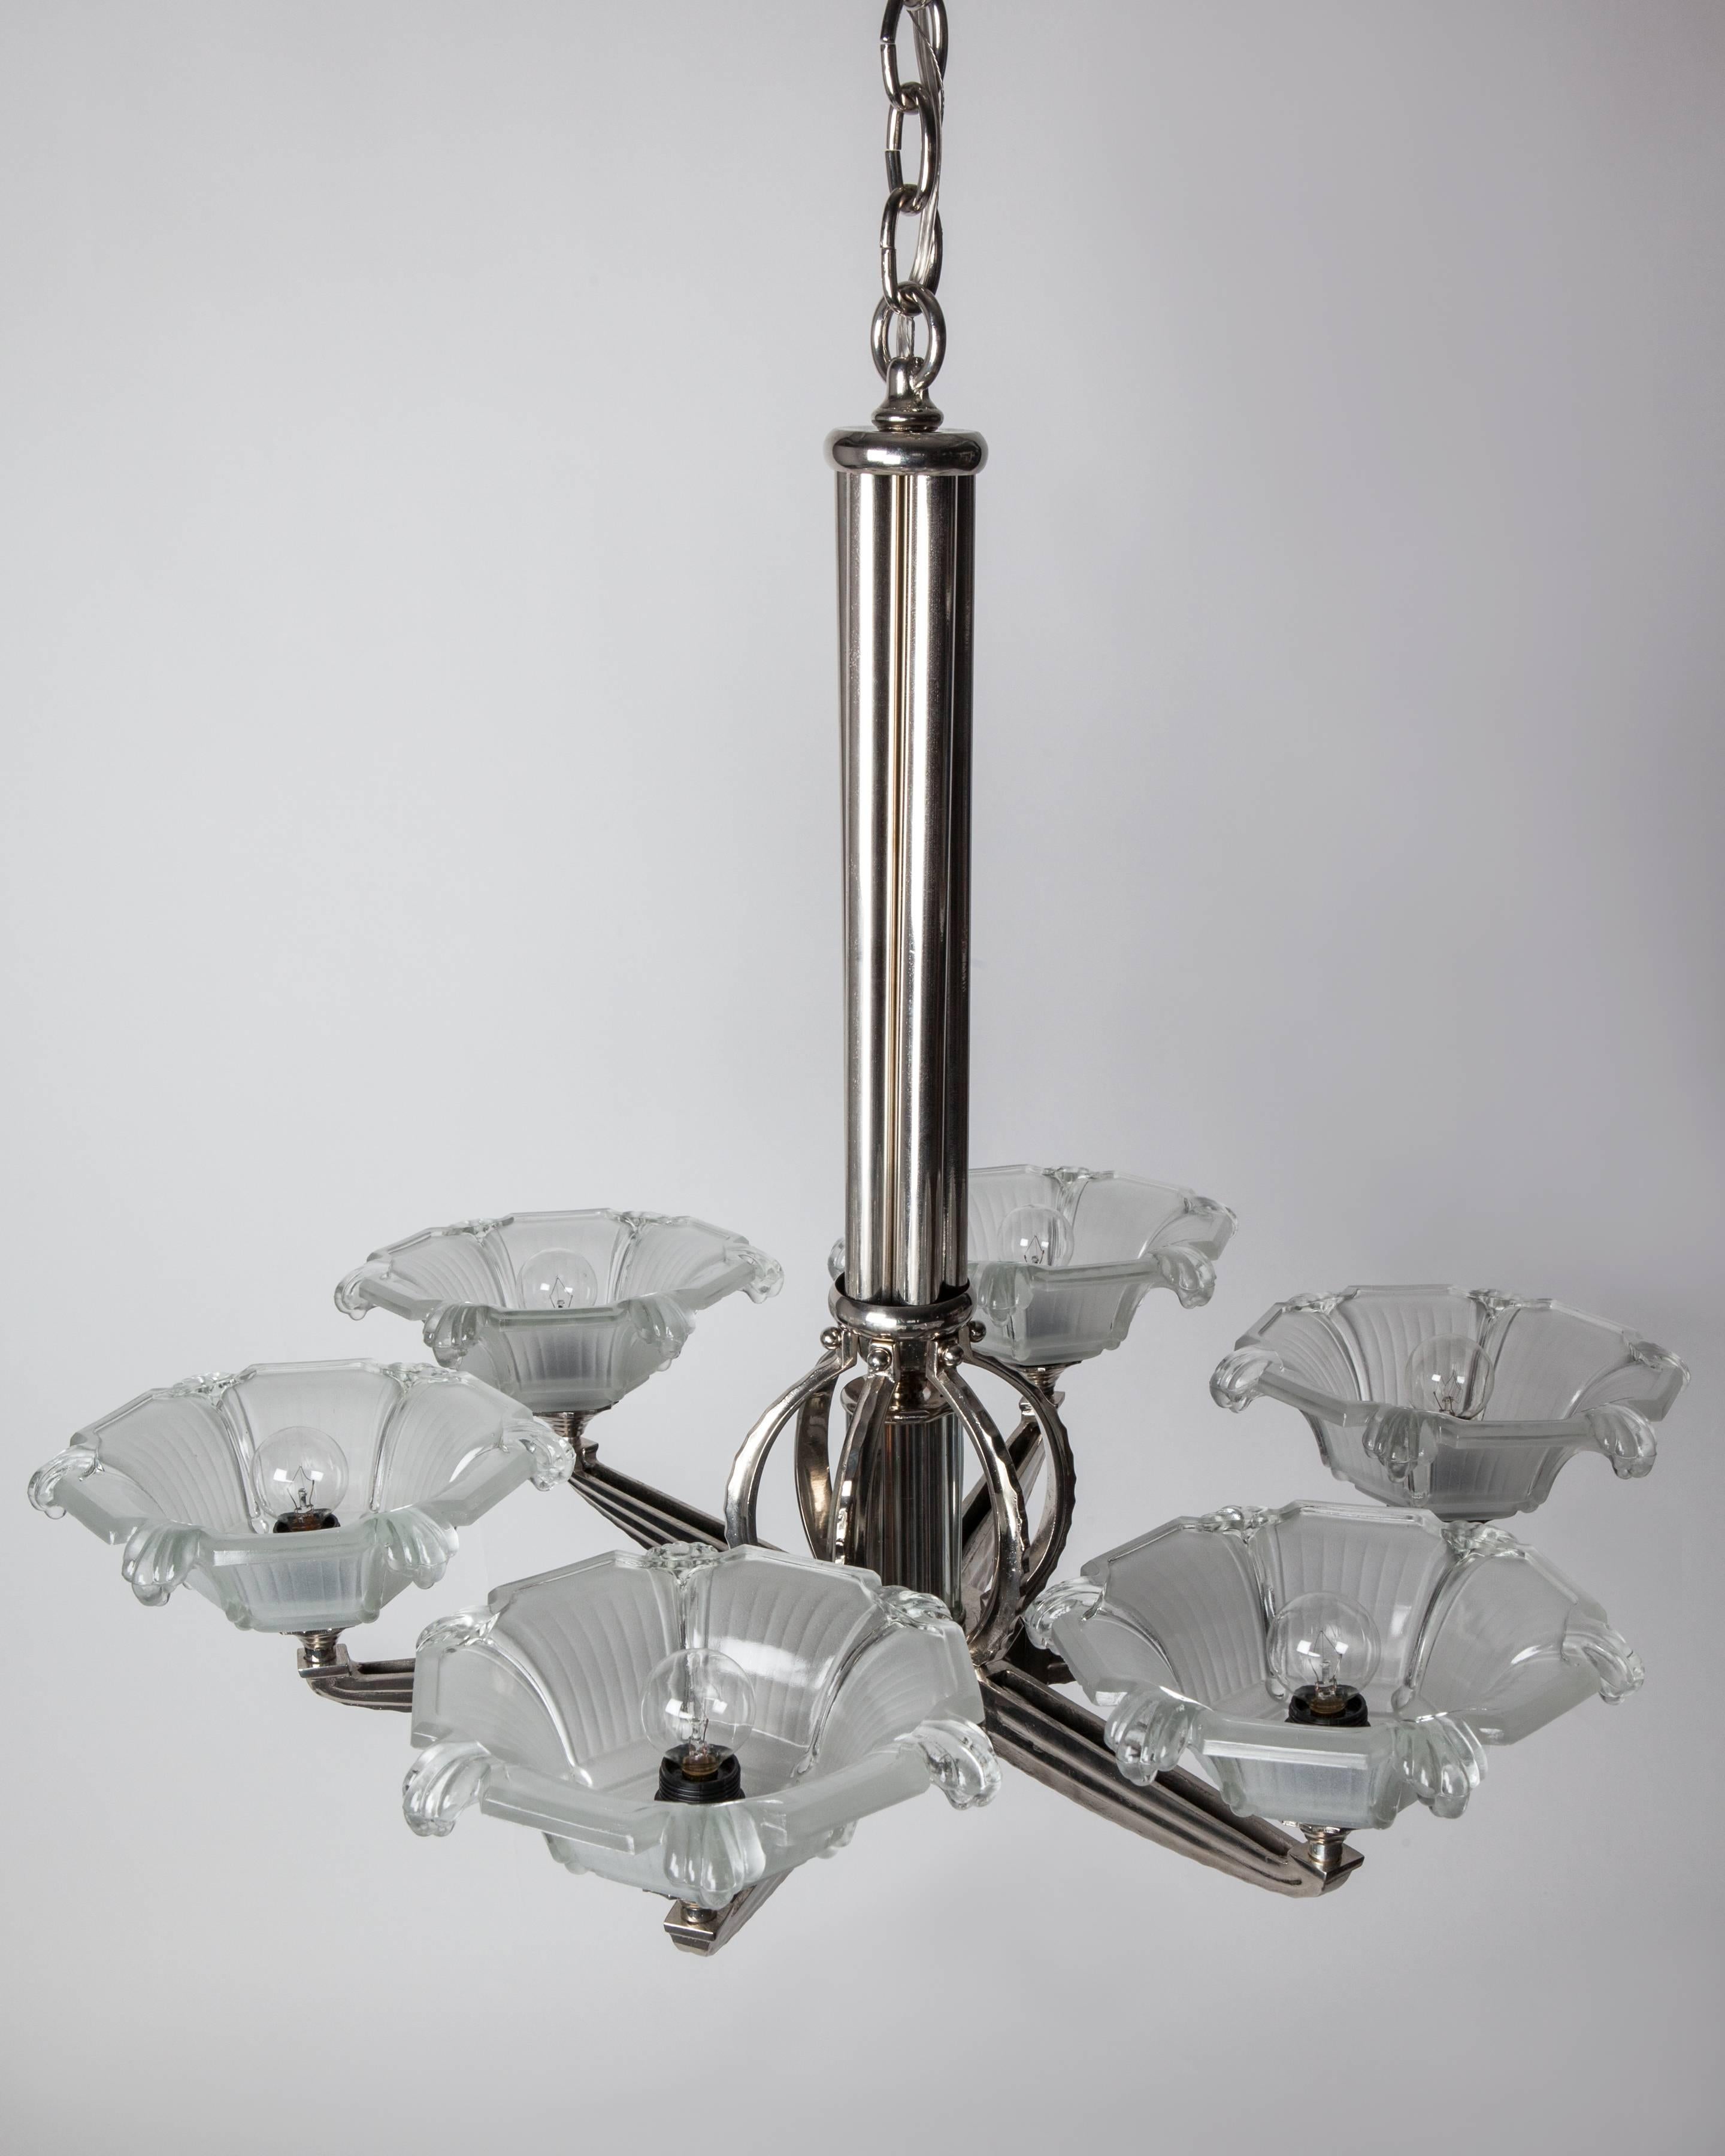 AHL4065
A vintage six-light German chandelier with a reeded nickel and glass rod body, fluted arms, and frosted floral glass shades. In a polished nickel finish. Due to the antique nature of this fixture, there may be some nicks or imperfections in